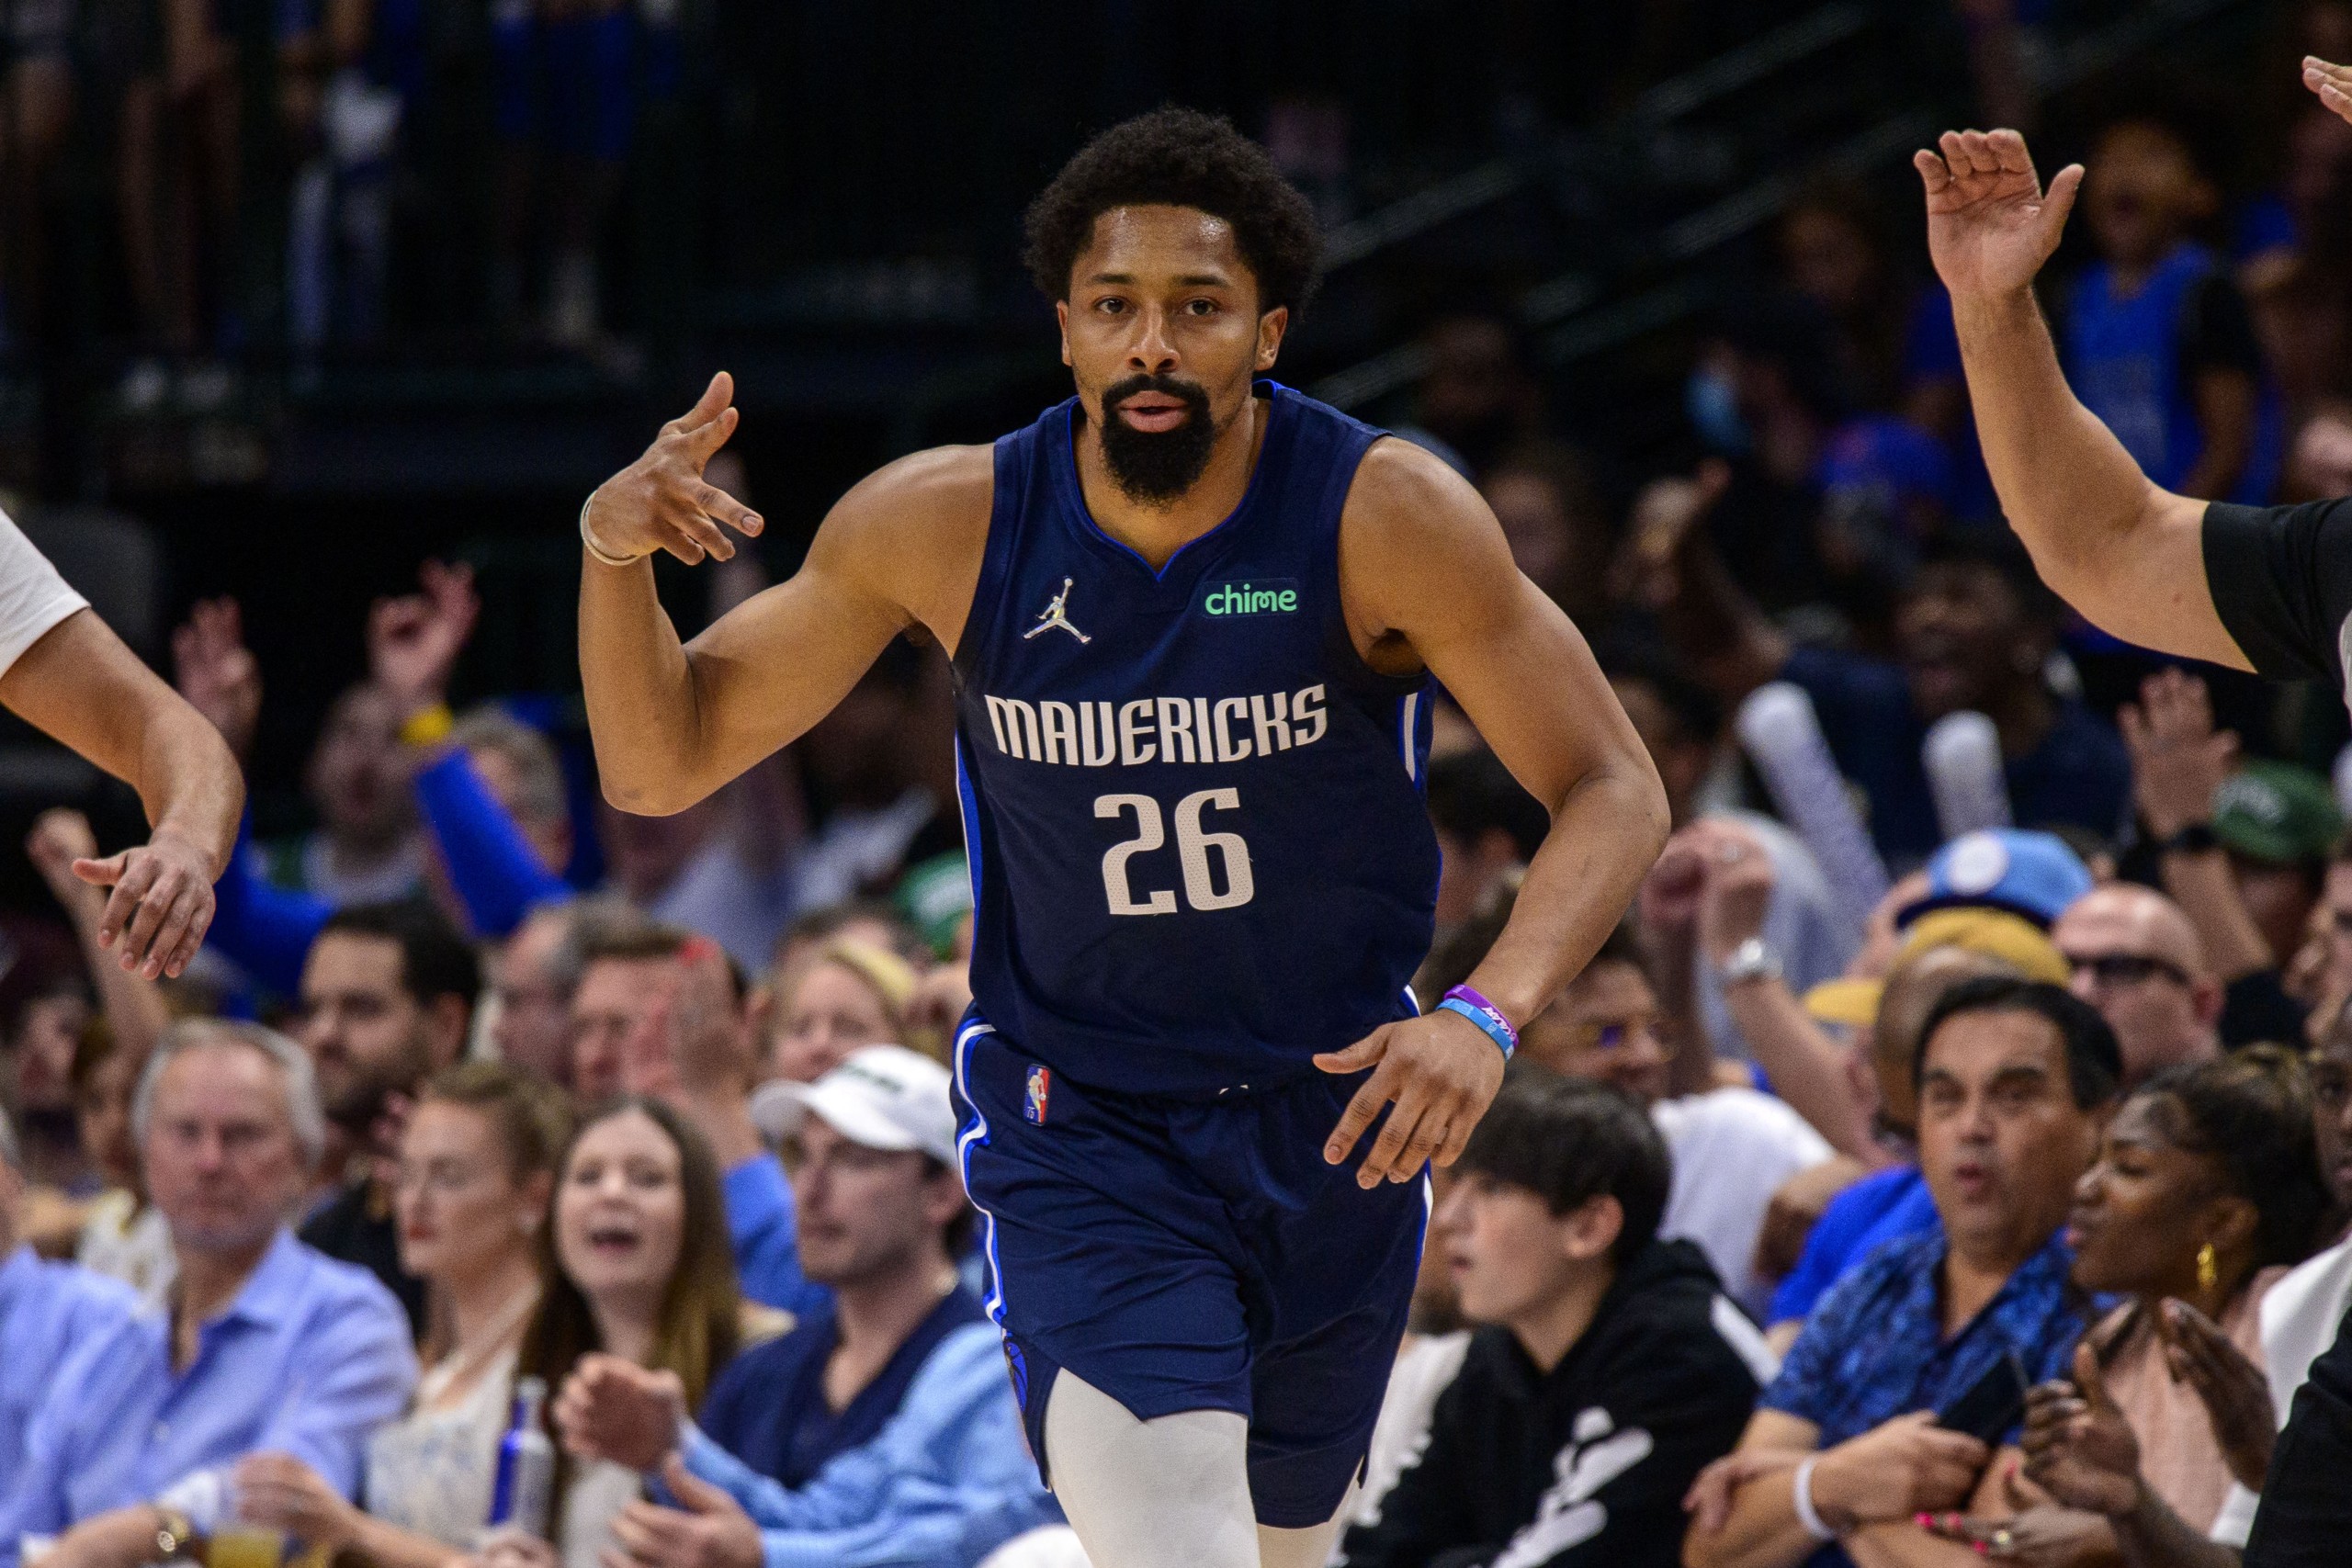 May 8, 2022; Dallas, Texas, USA; Dallas Mavericks guard Spencer Dinwiddie (26) celebrates making a three point basket against the Phoenix Suns during the second quarter during game four of the second round for the 2022 NBA playoffs at American Airlines Center. Mandatory Credit: Jerome Miron-USA TODAY Sports